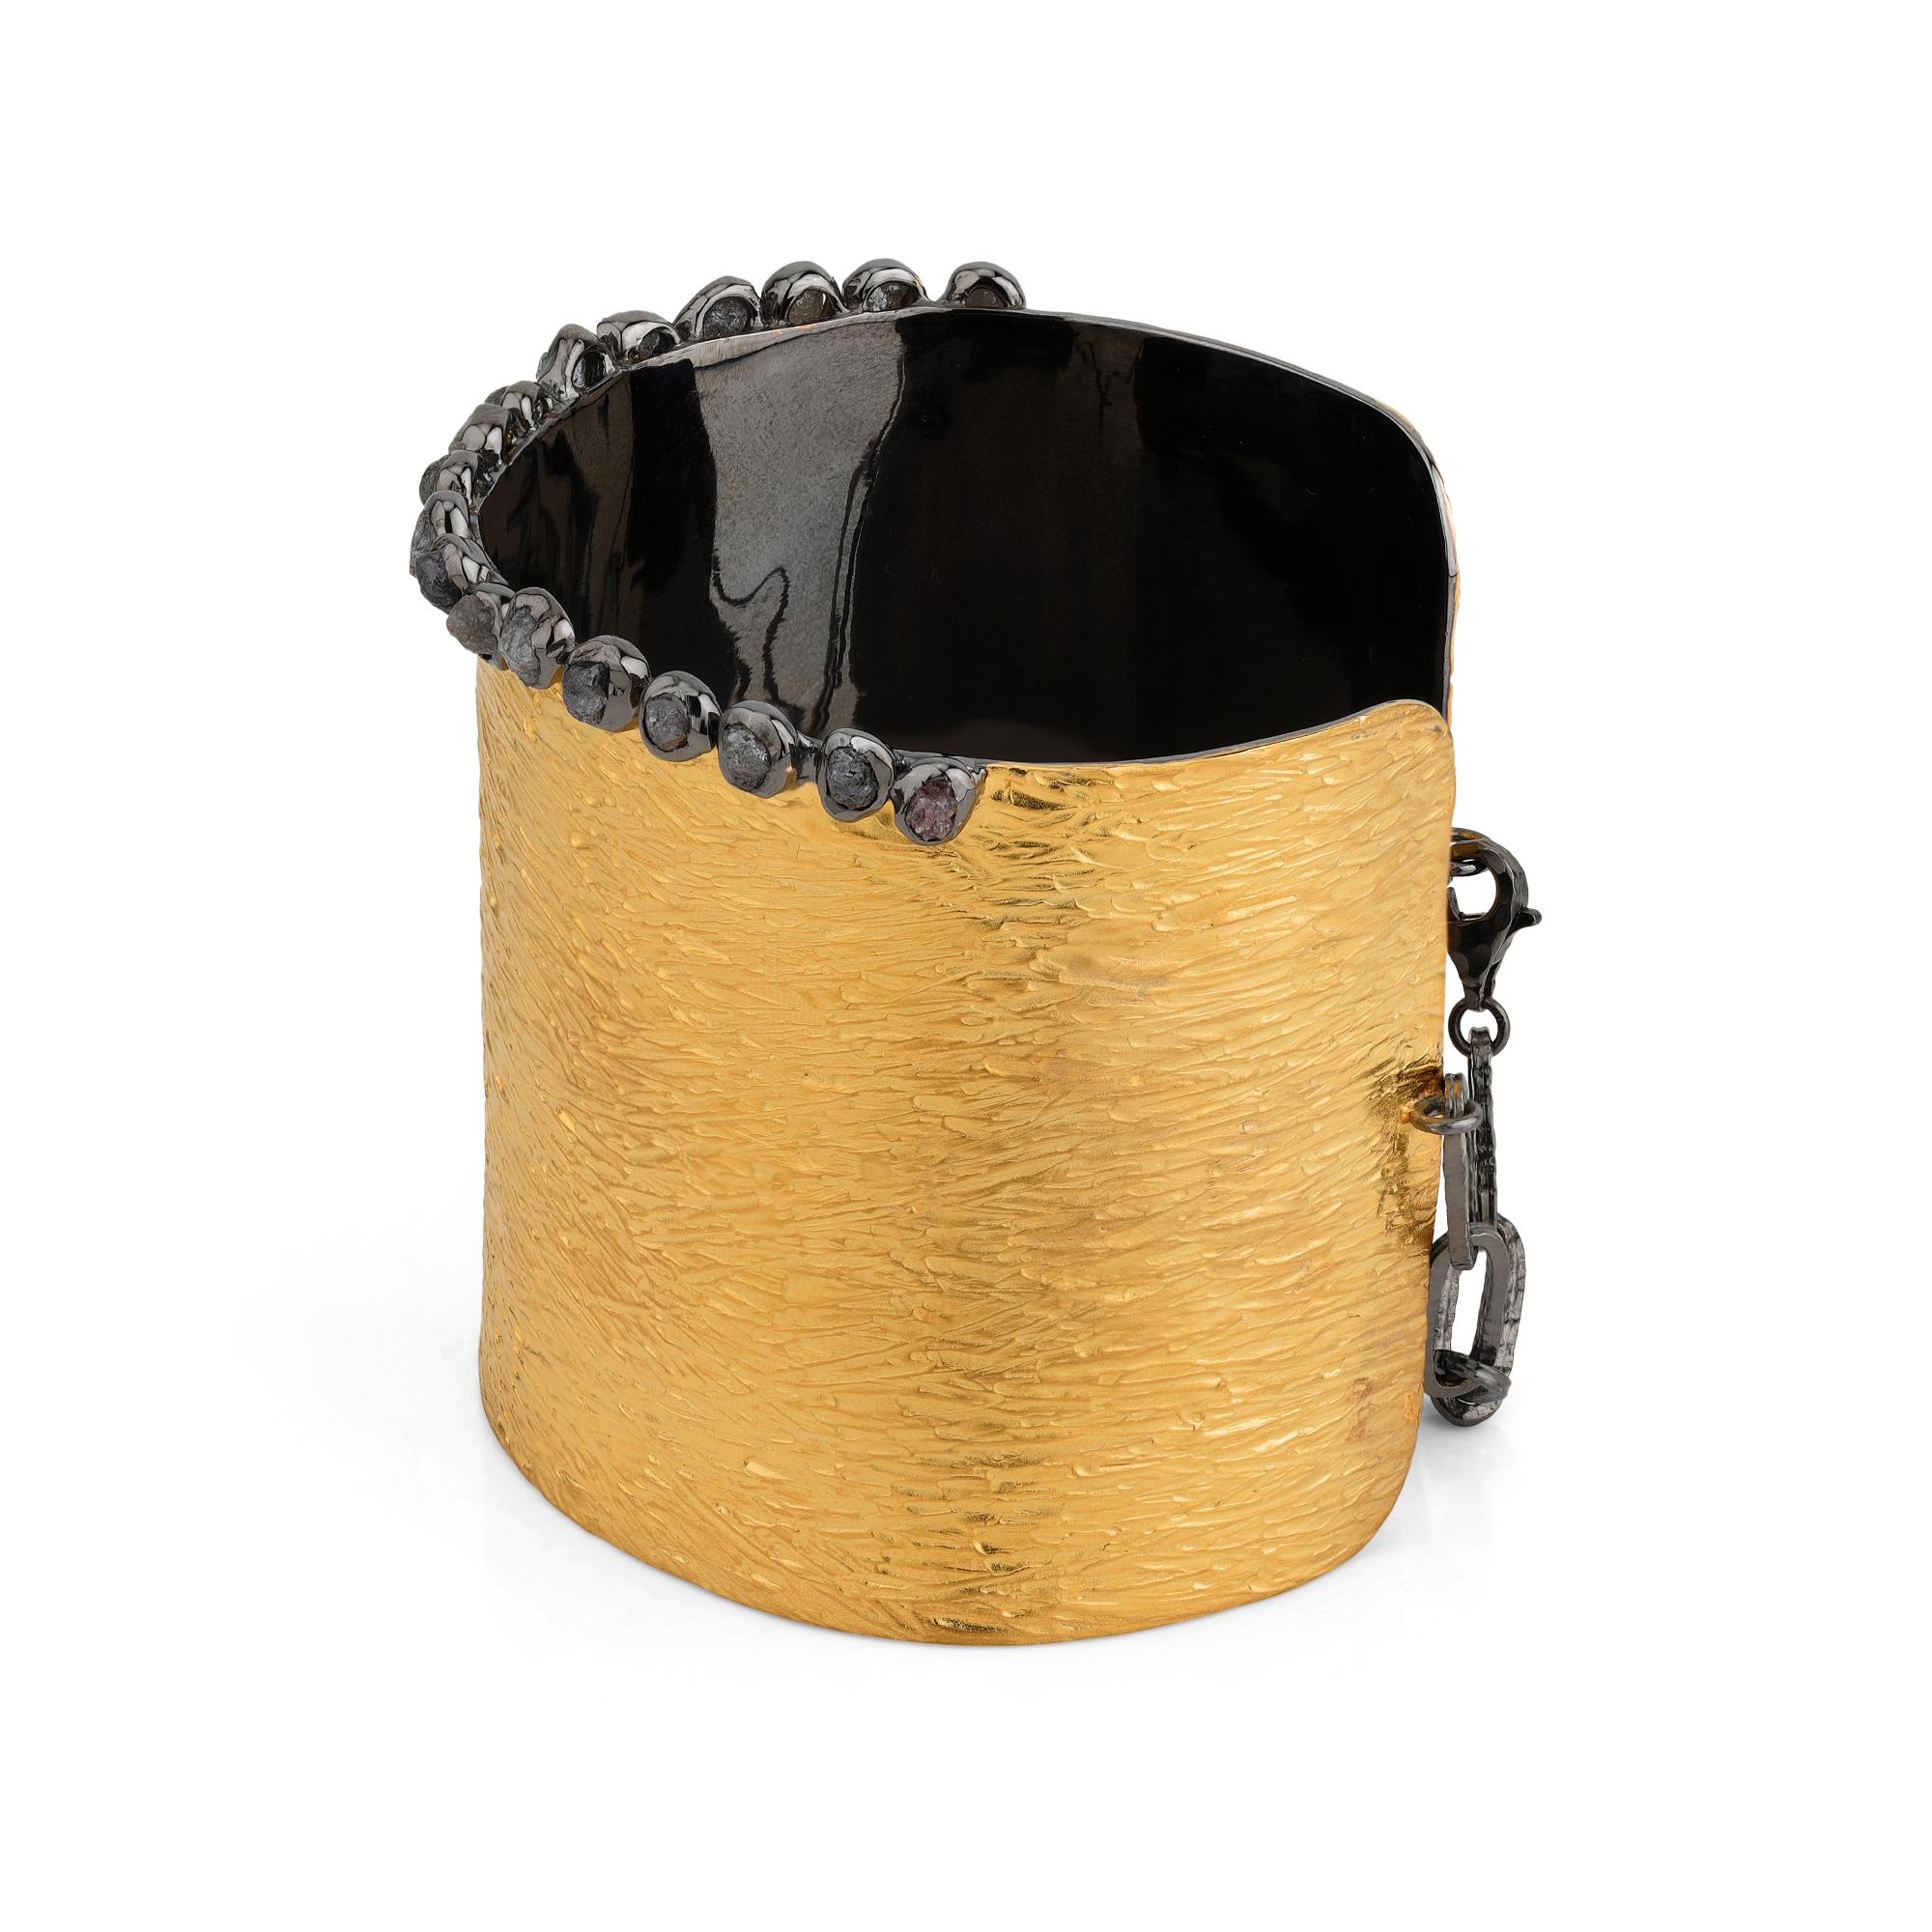 Contemporary Adeitiy silver handcuff with mined diamonds & 3-micron gold and rhodium plating